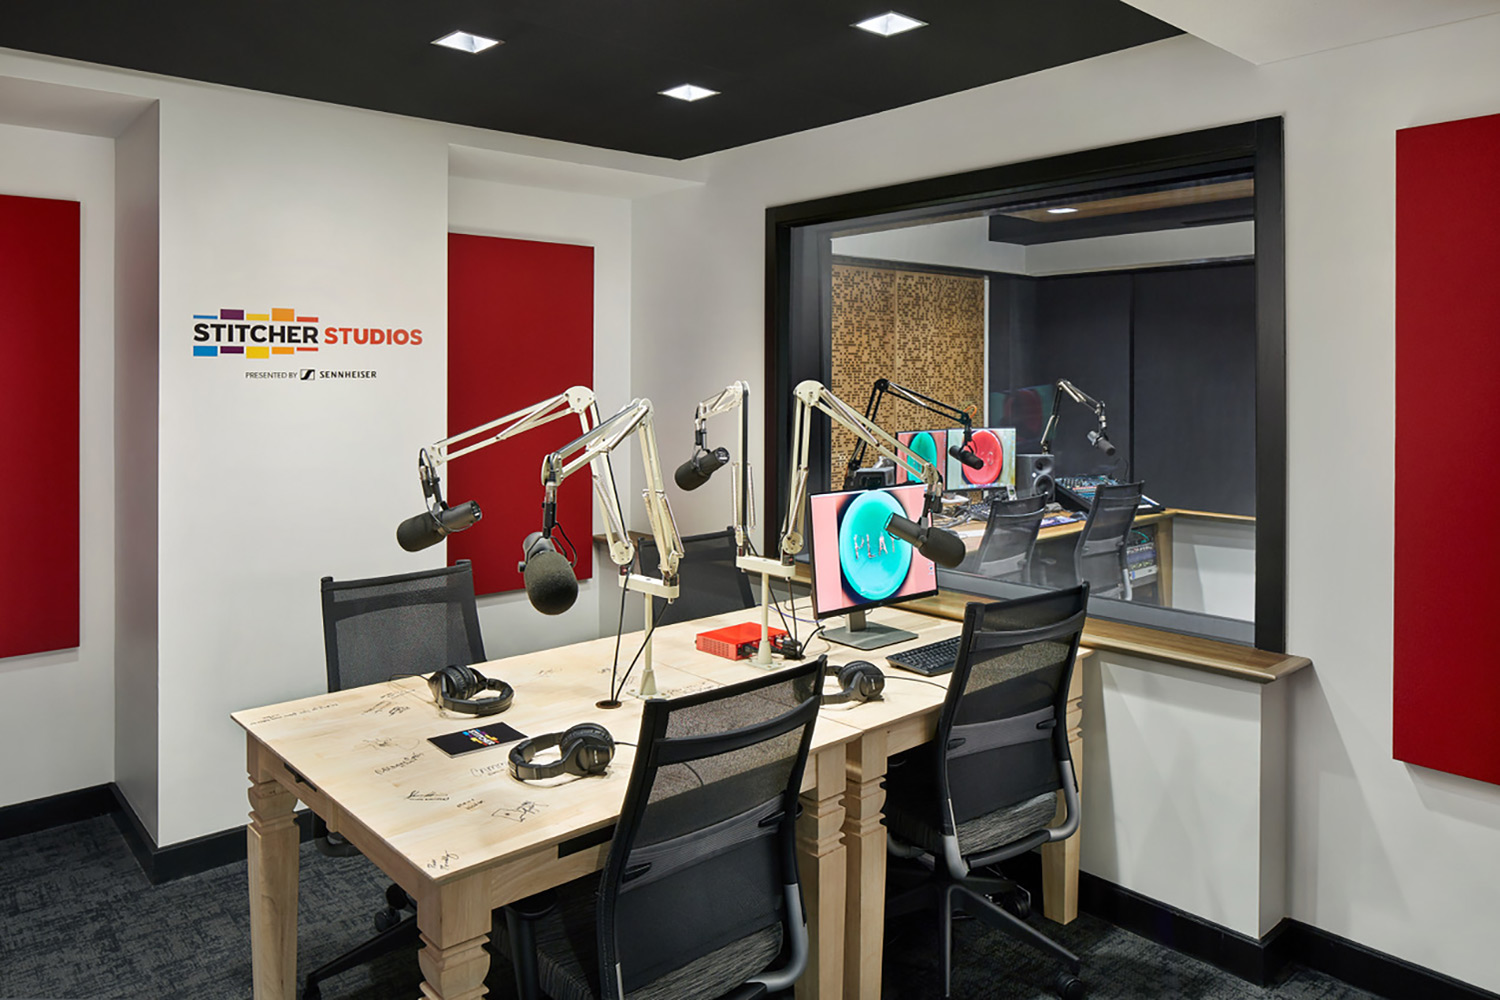 Stitcher is among the earliest, the most creative and most successful podcast creator companies. Their team made a move to build out larger production facilities in both its NY and LA offices and they chose WSDG to design their new podcast studios facilities. Studio B.